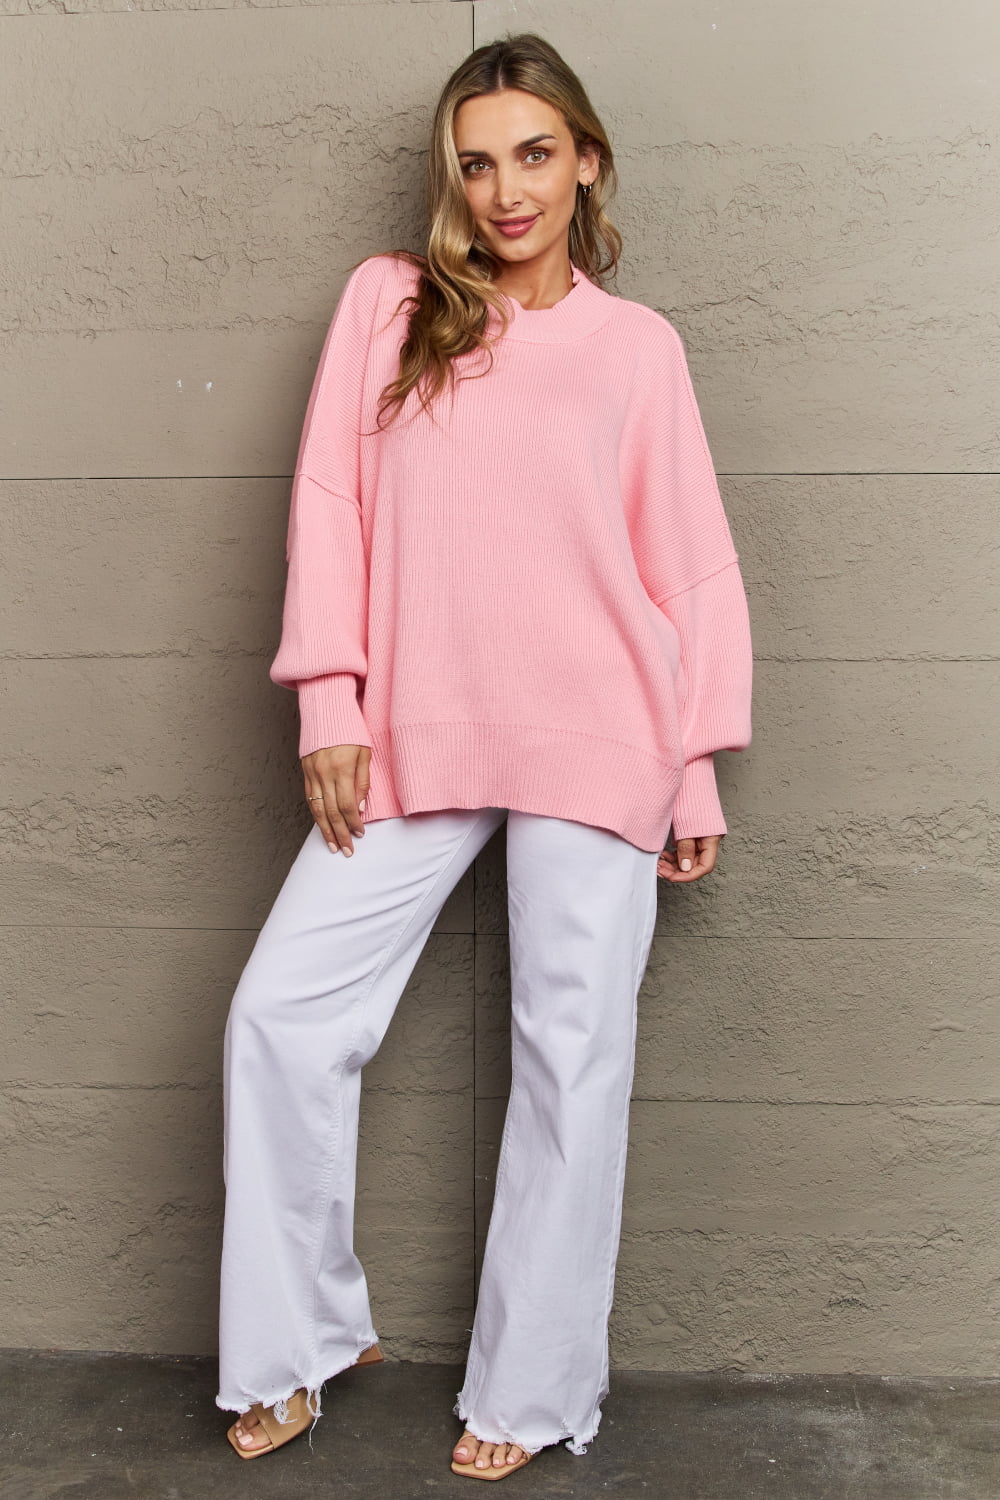 Emily Comfort Awaits Slouchy Side Slit Sweater in Pink - Coco and lulu boutique 